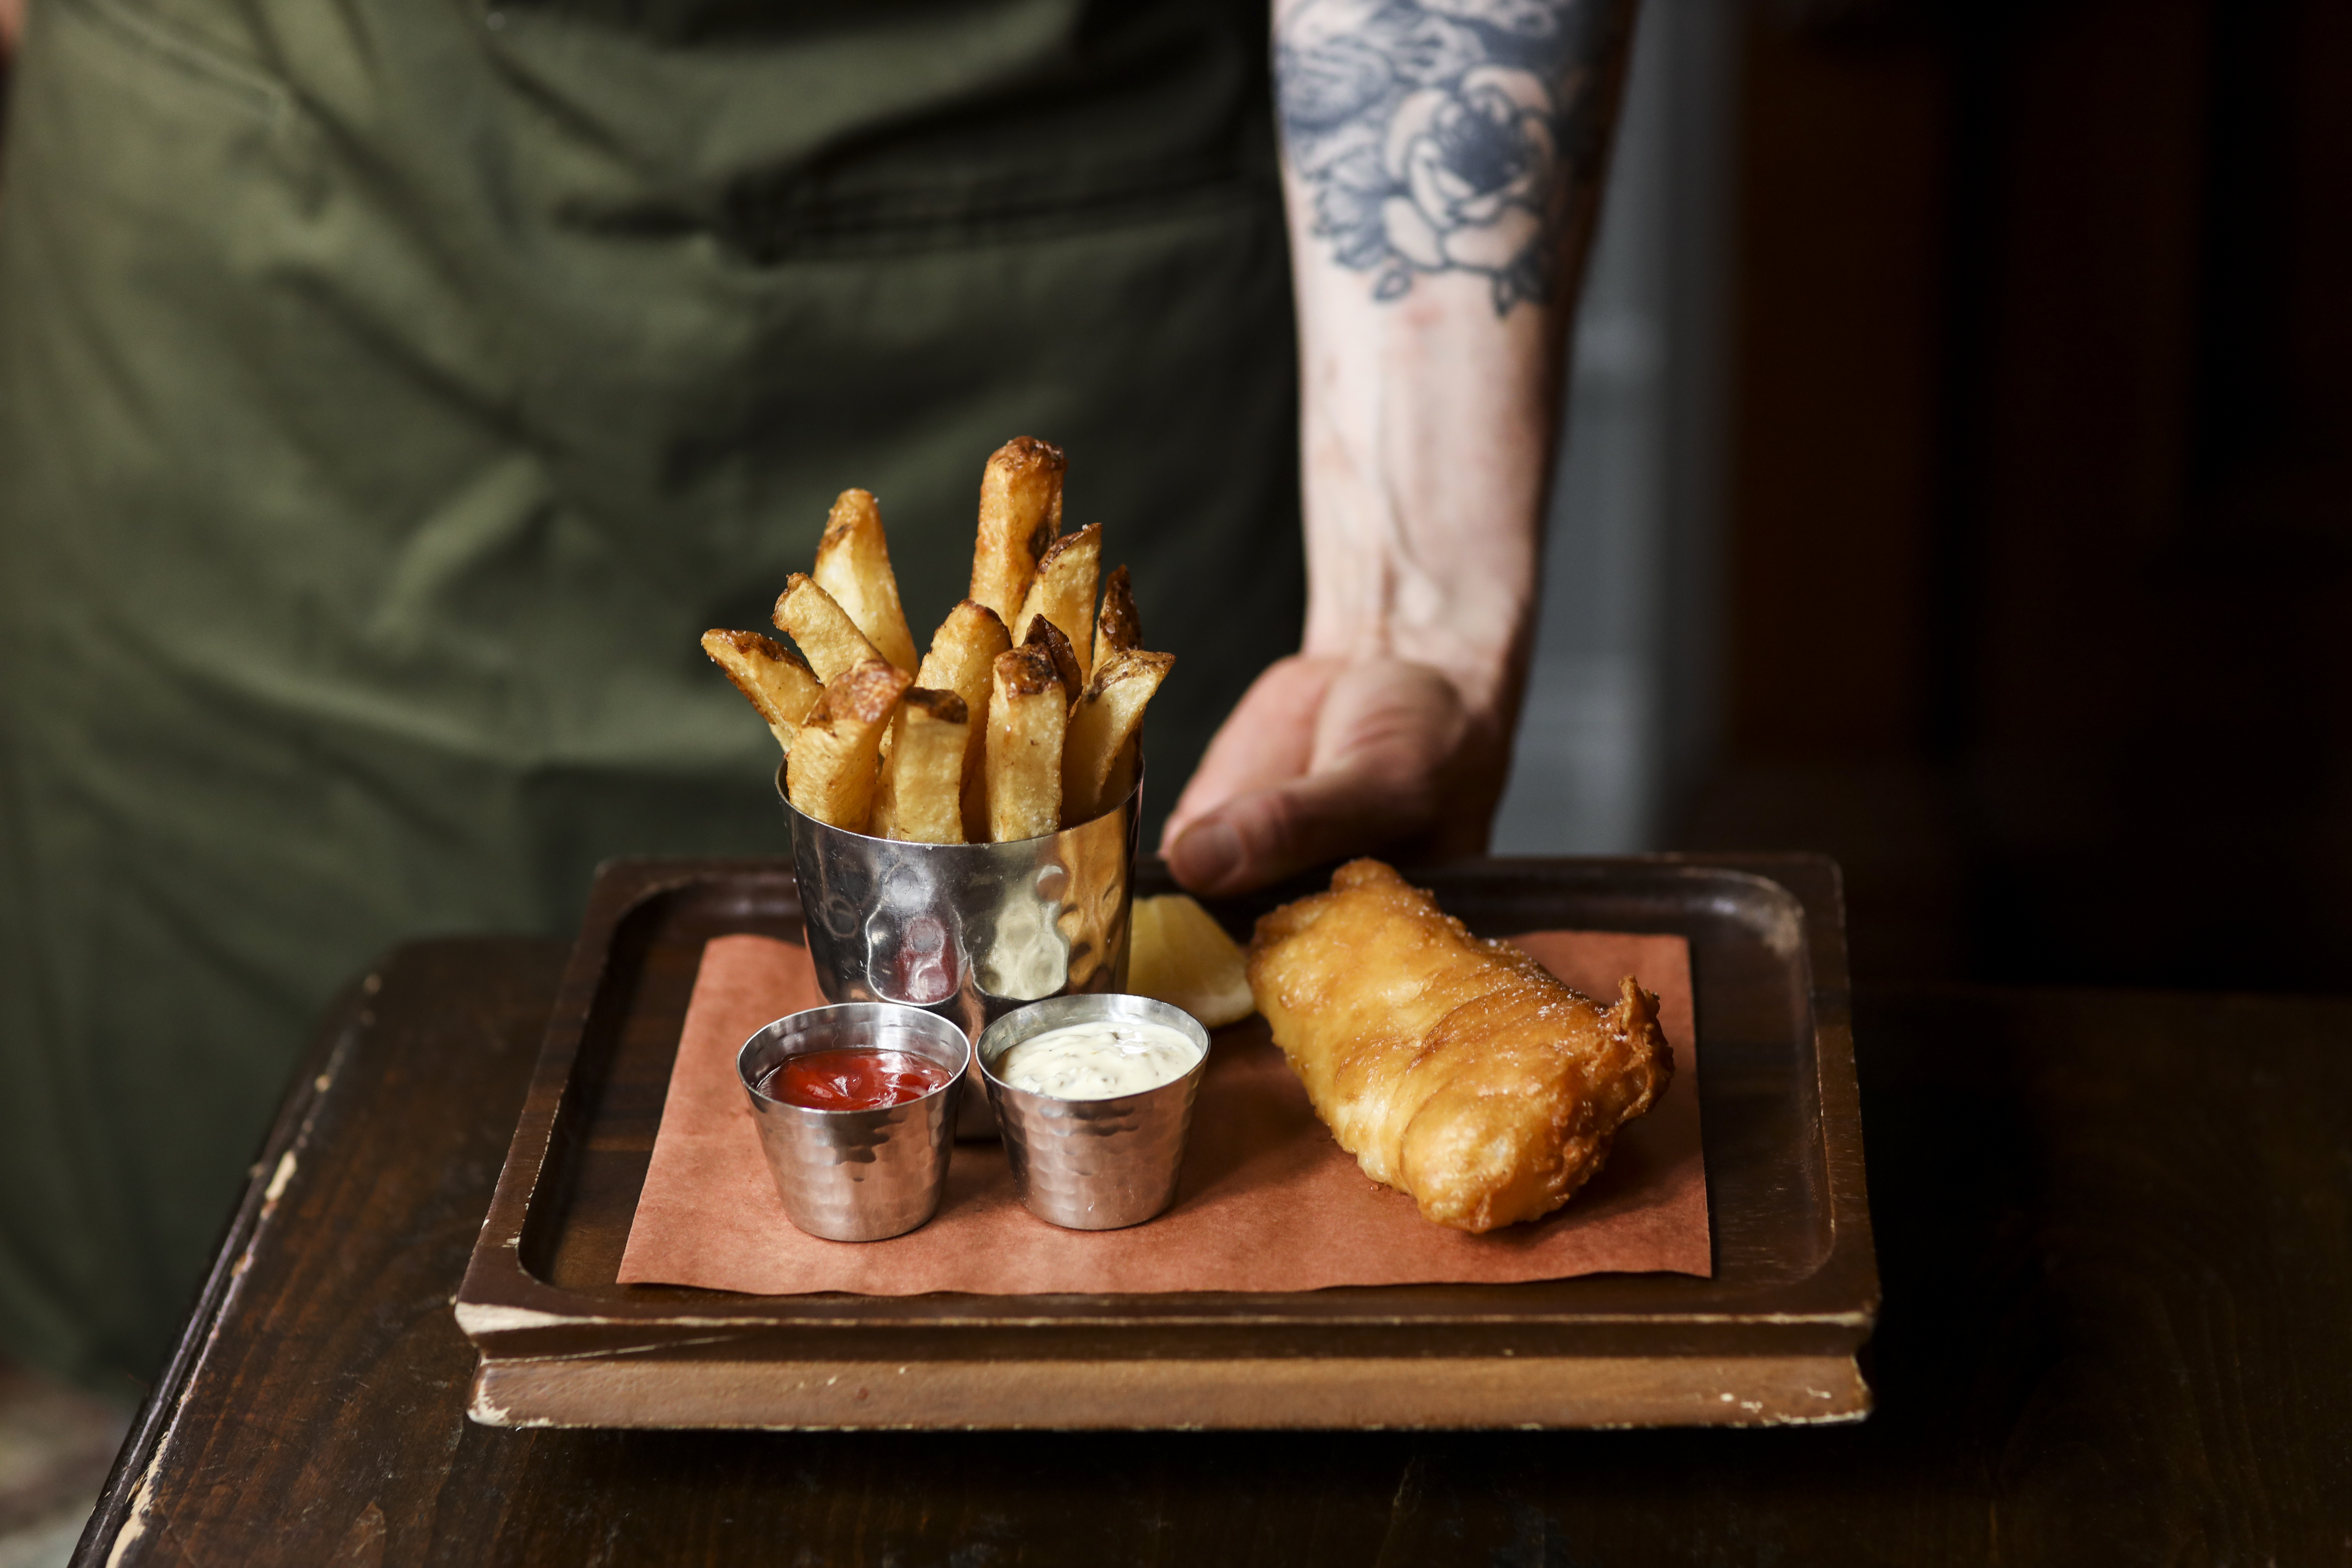 A server holding a tray of fish and chips